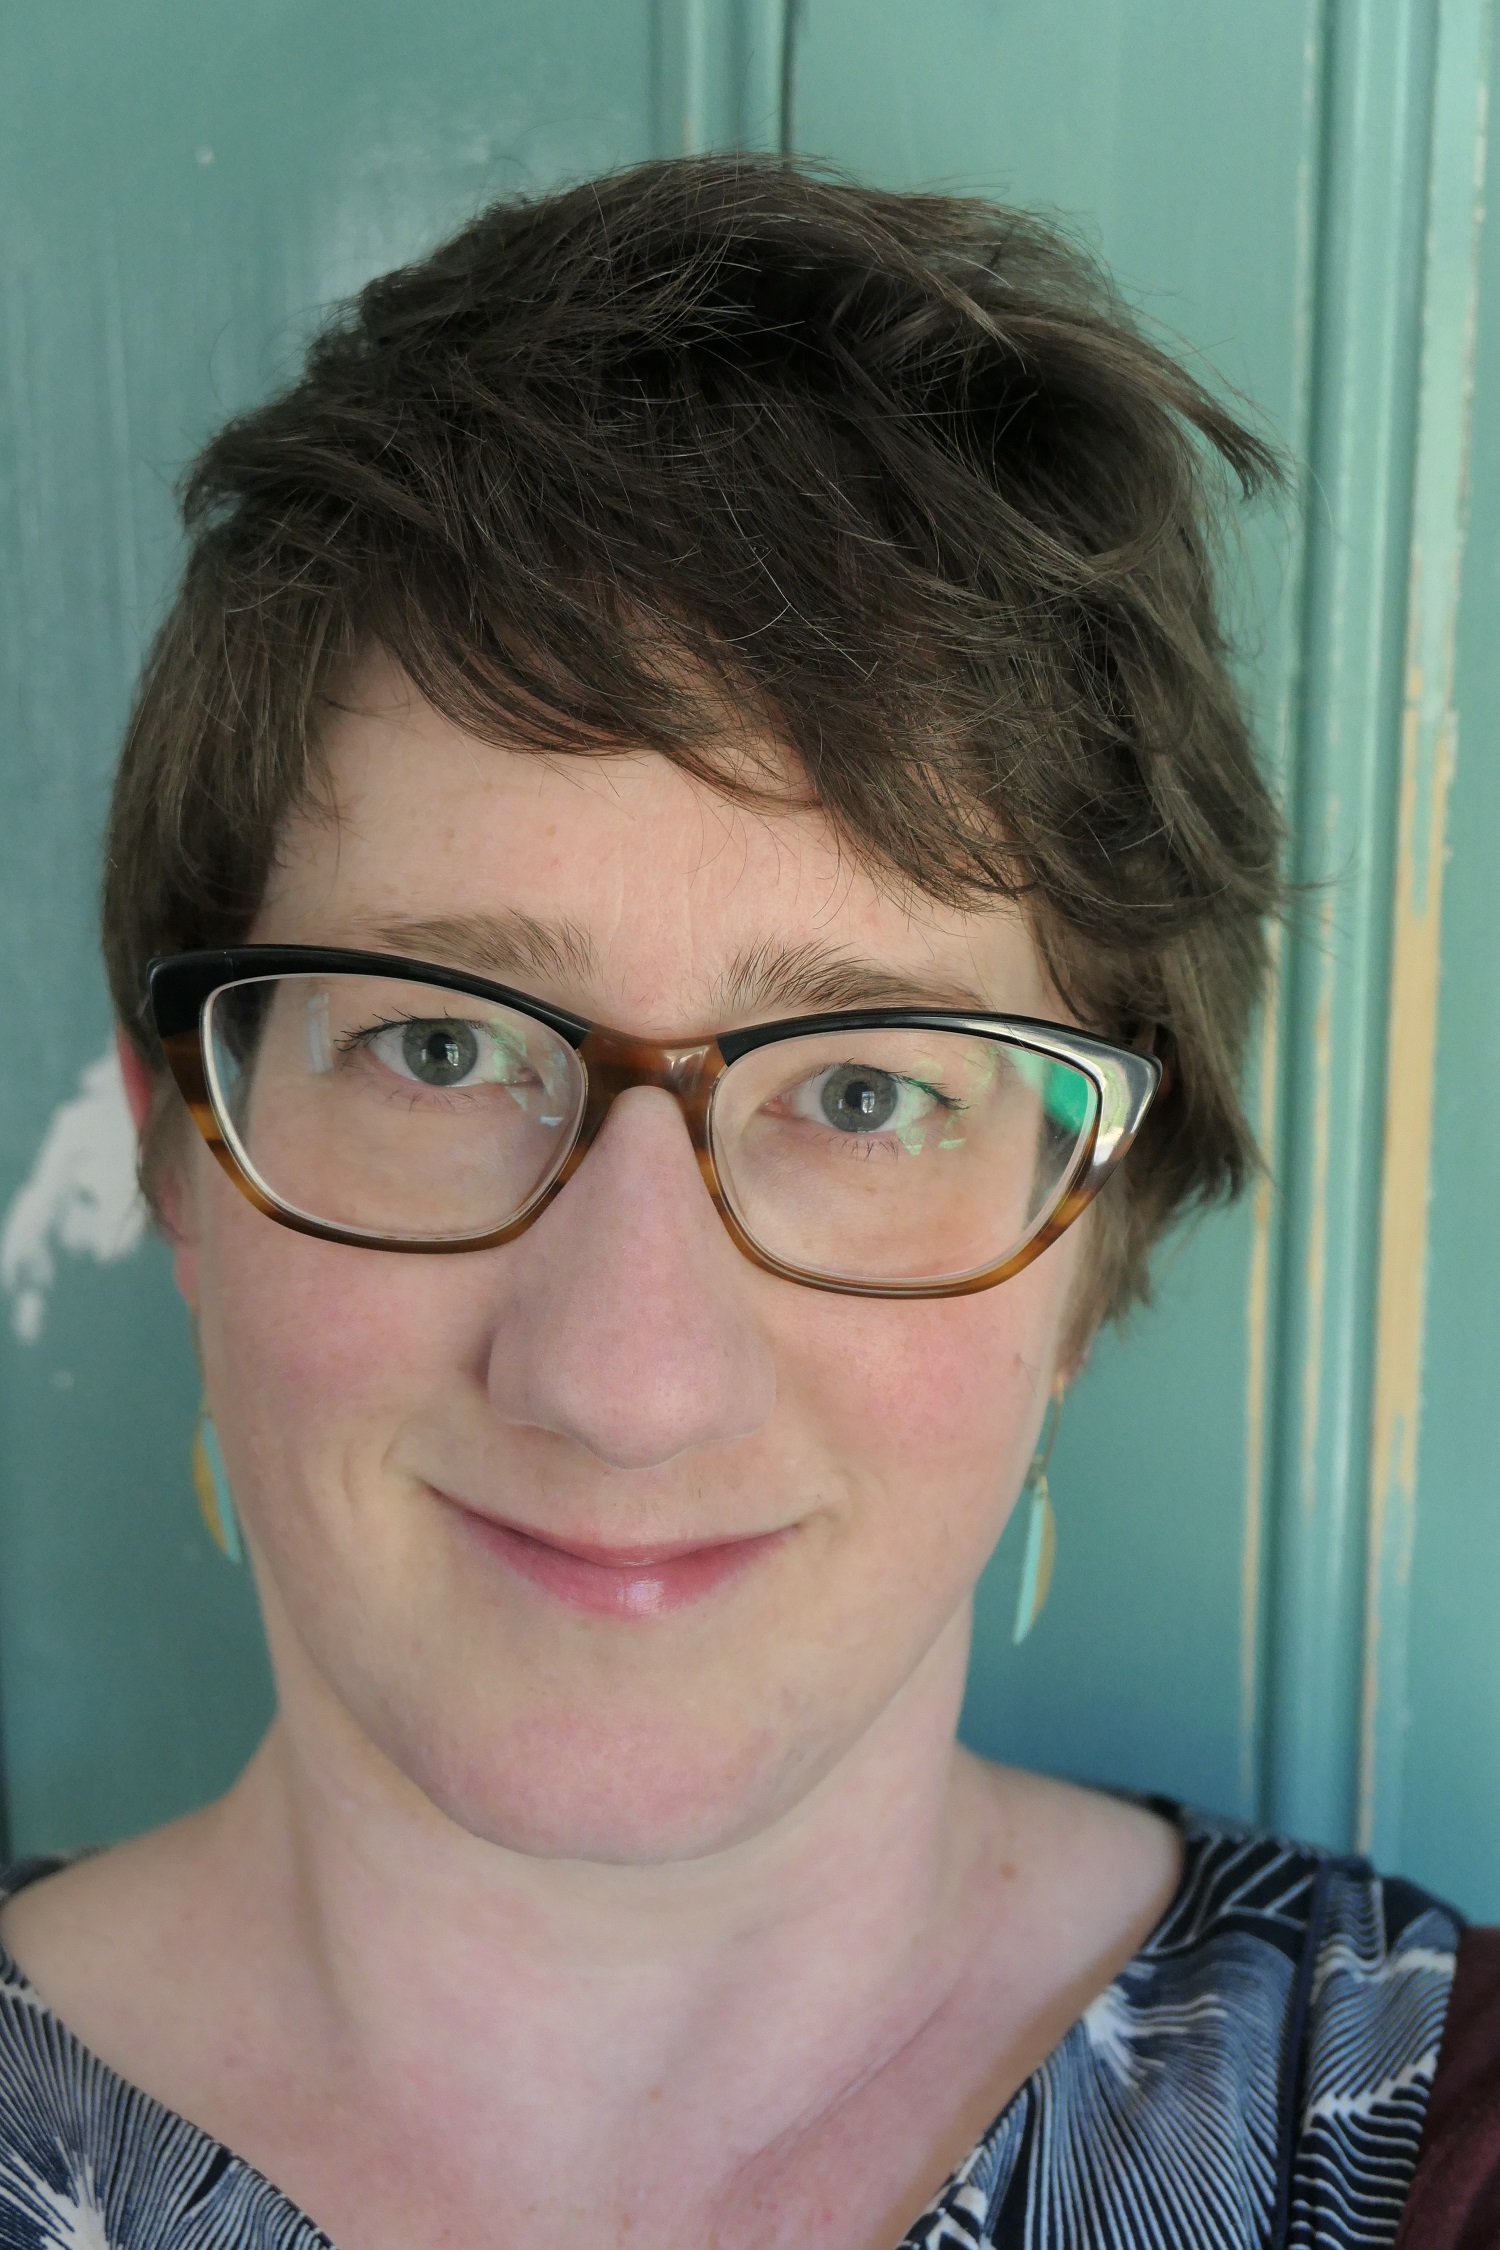 A headshot of a person with short dark hair wearing glasses.